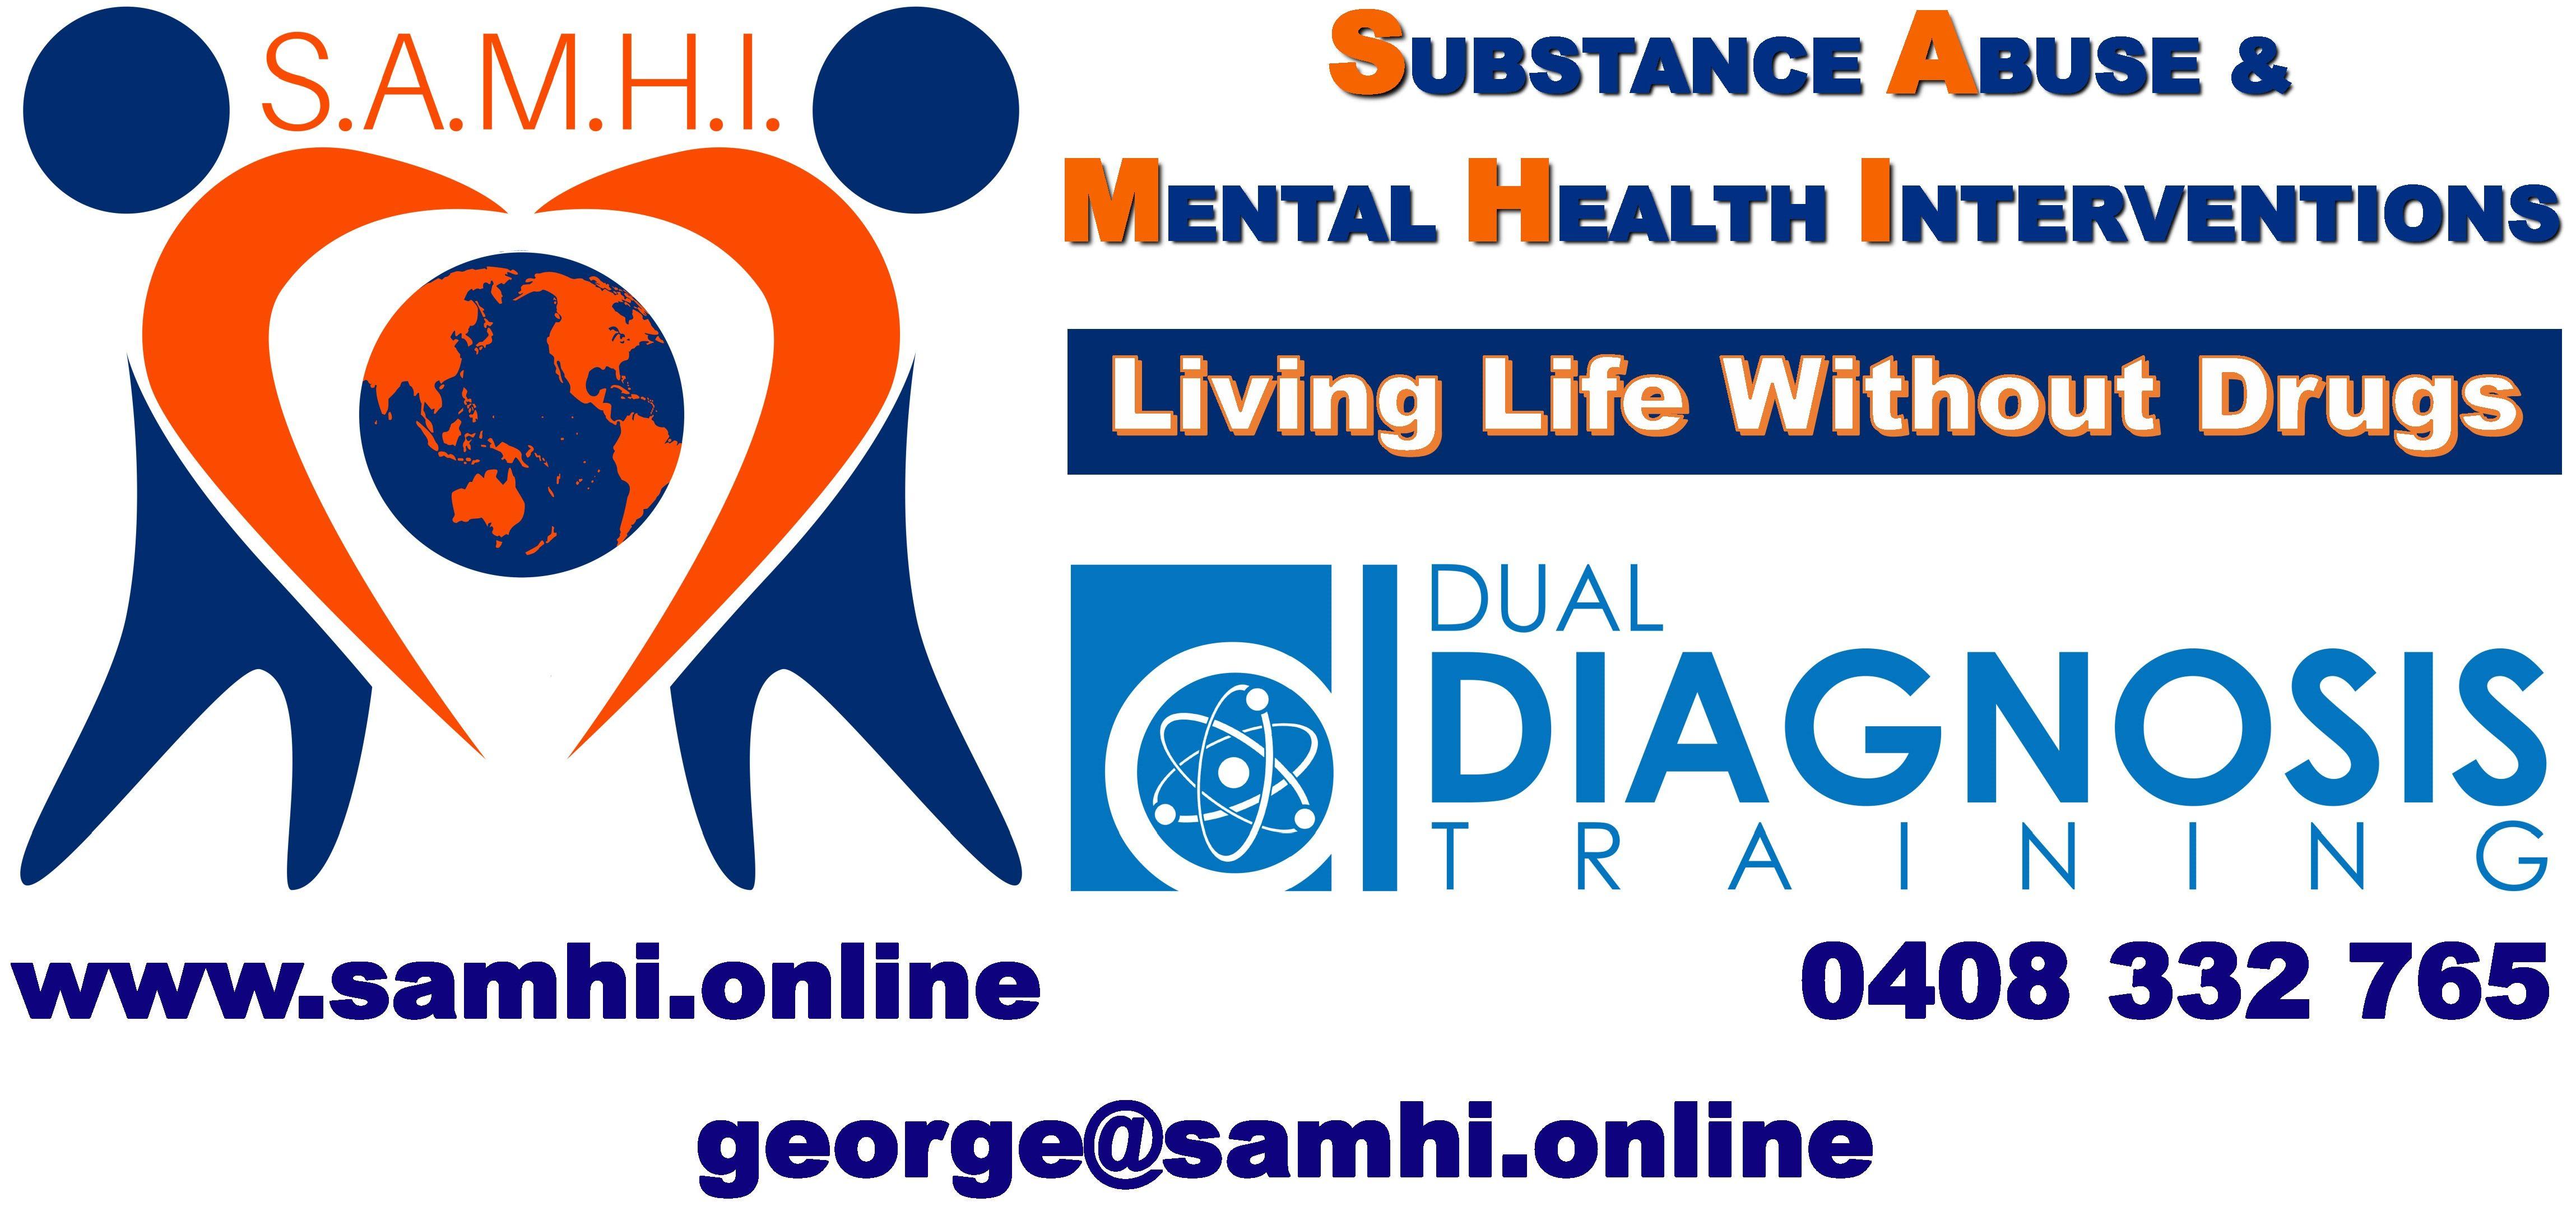 Abuse Logo - S.A.M.H.I. ONLINE. Substance Abuse & Mental Health Interventions